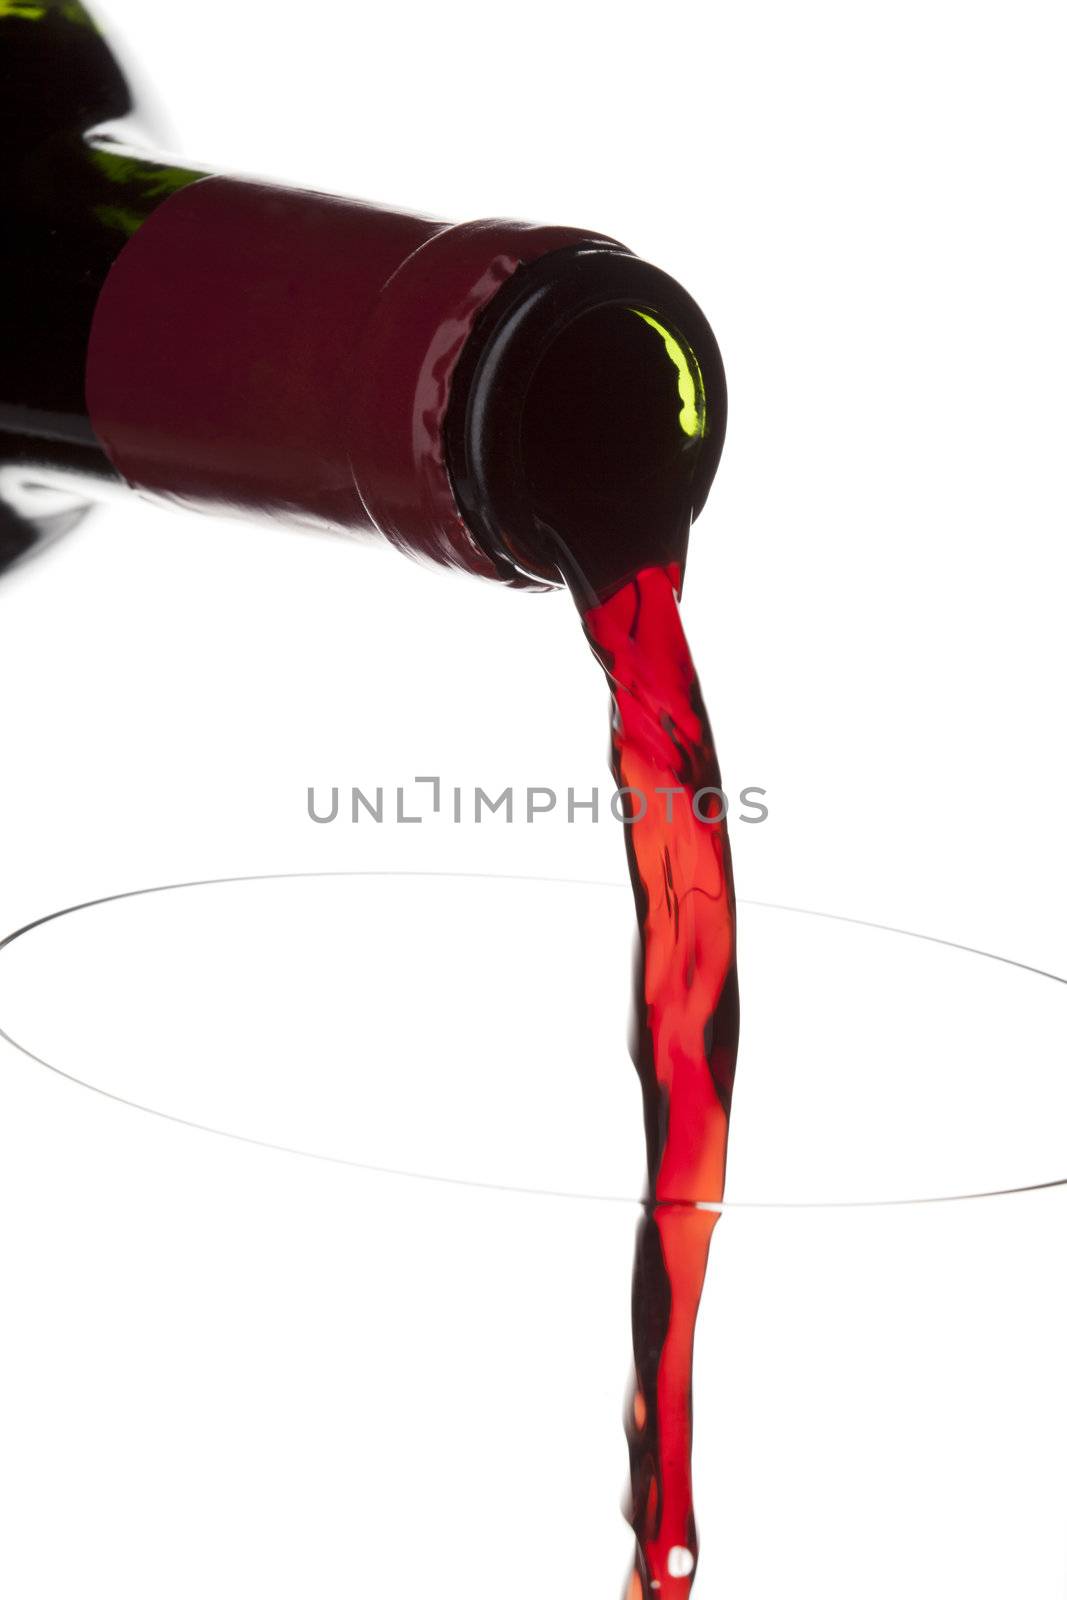 Flowing wine from a bottle displayed on white background.